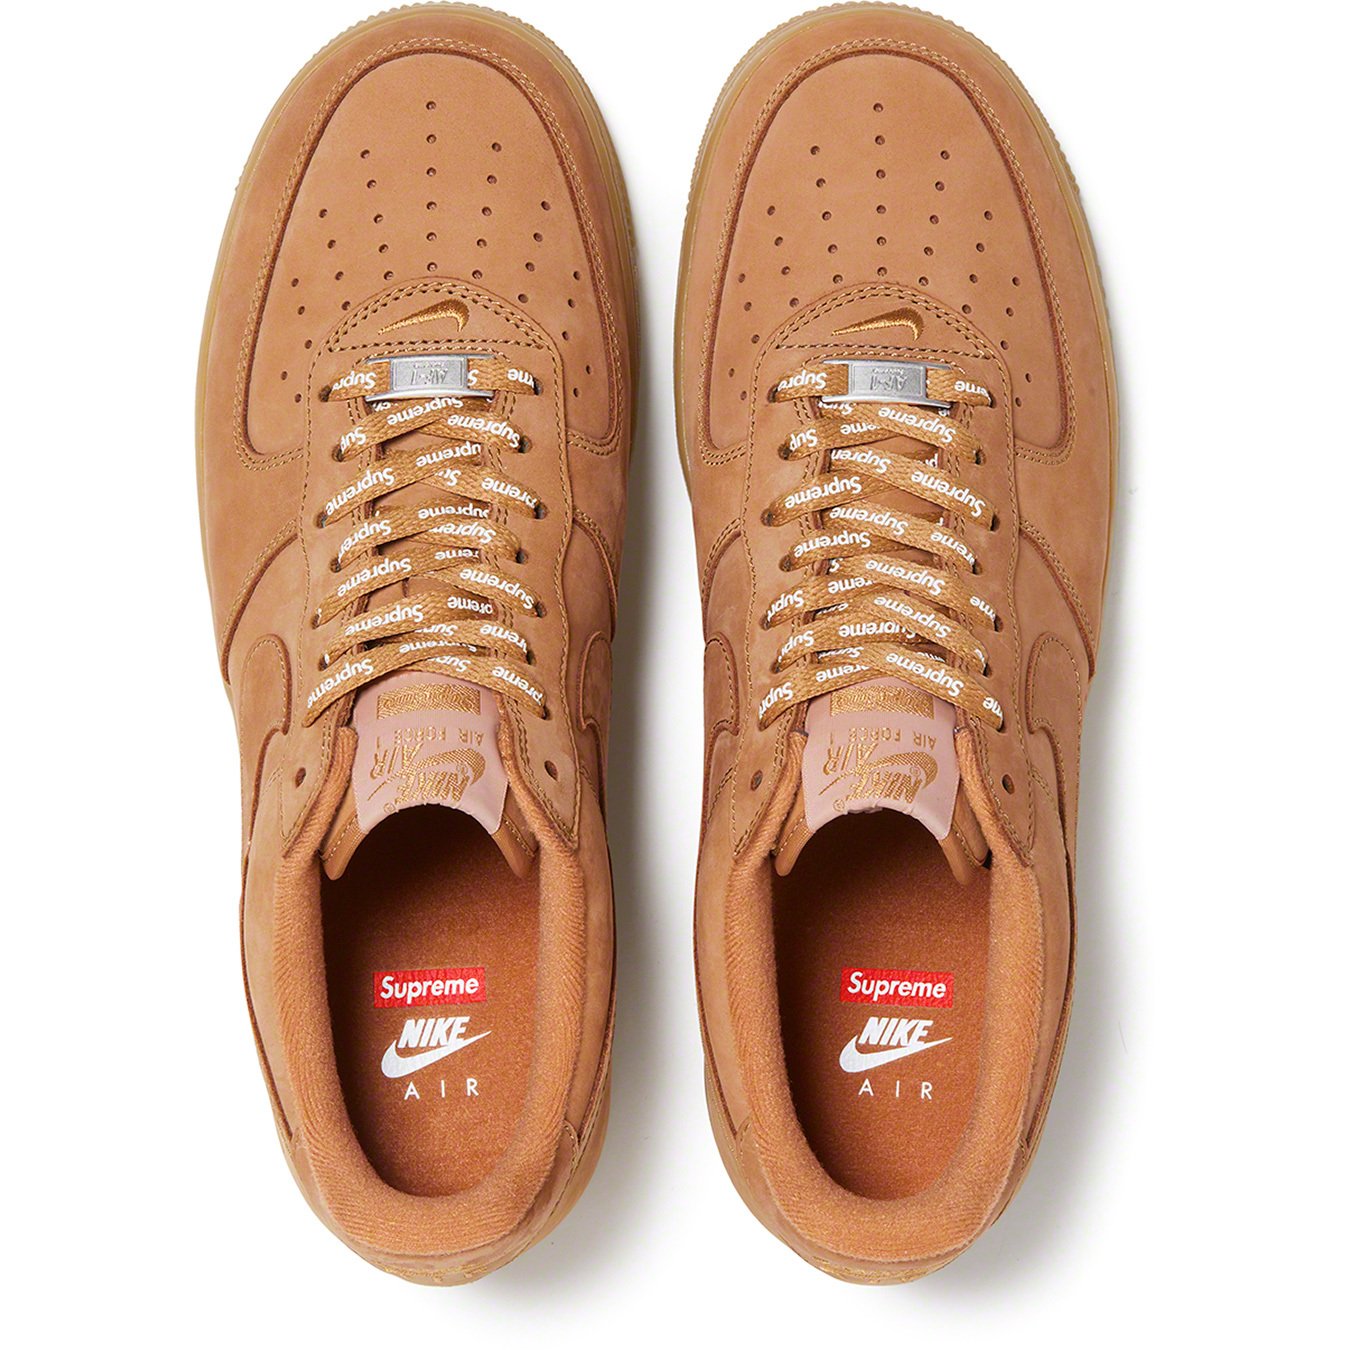 Supreme x Nike Air Force 1 Low Wheat: First Look & Official Info